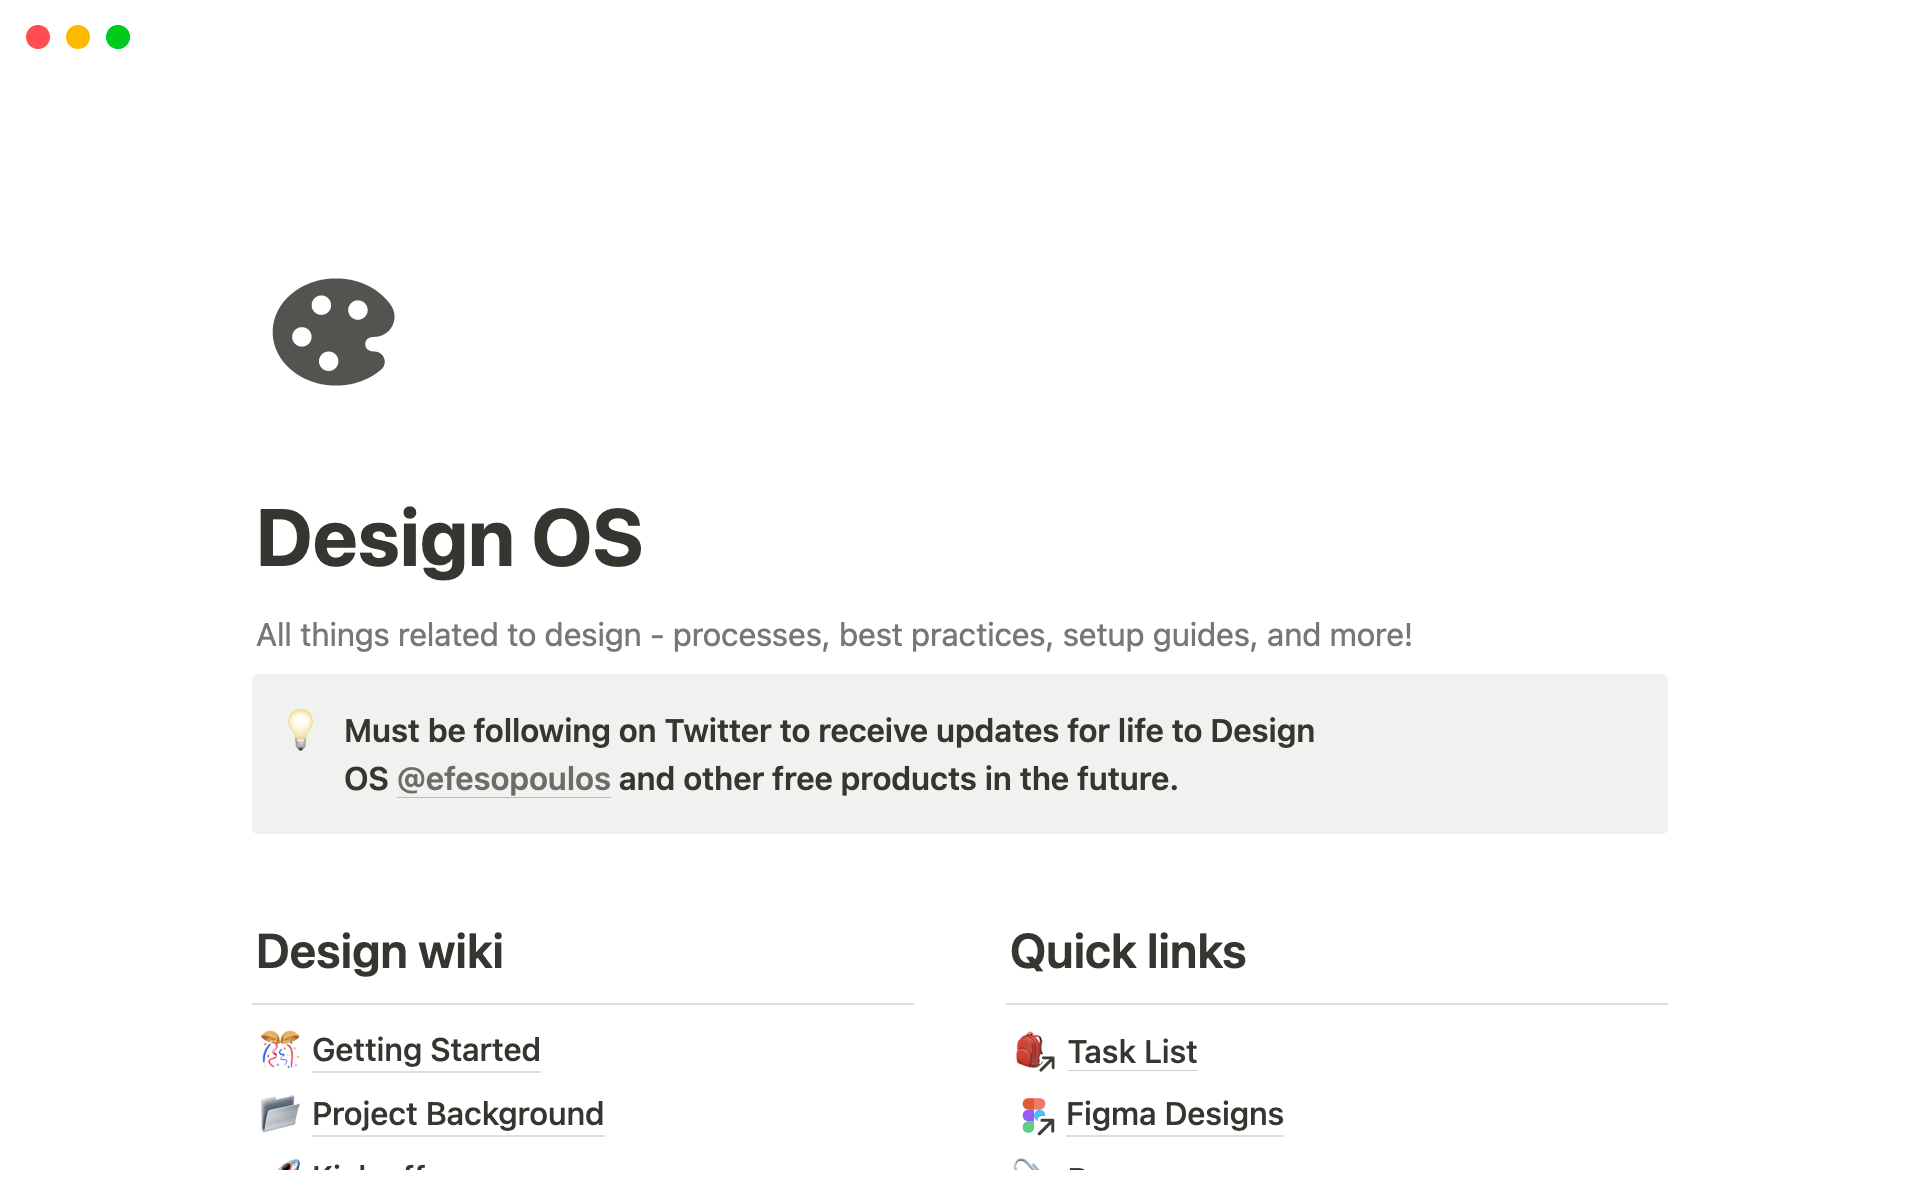 An operating system to manage design, research and insights.